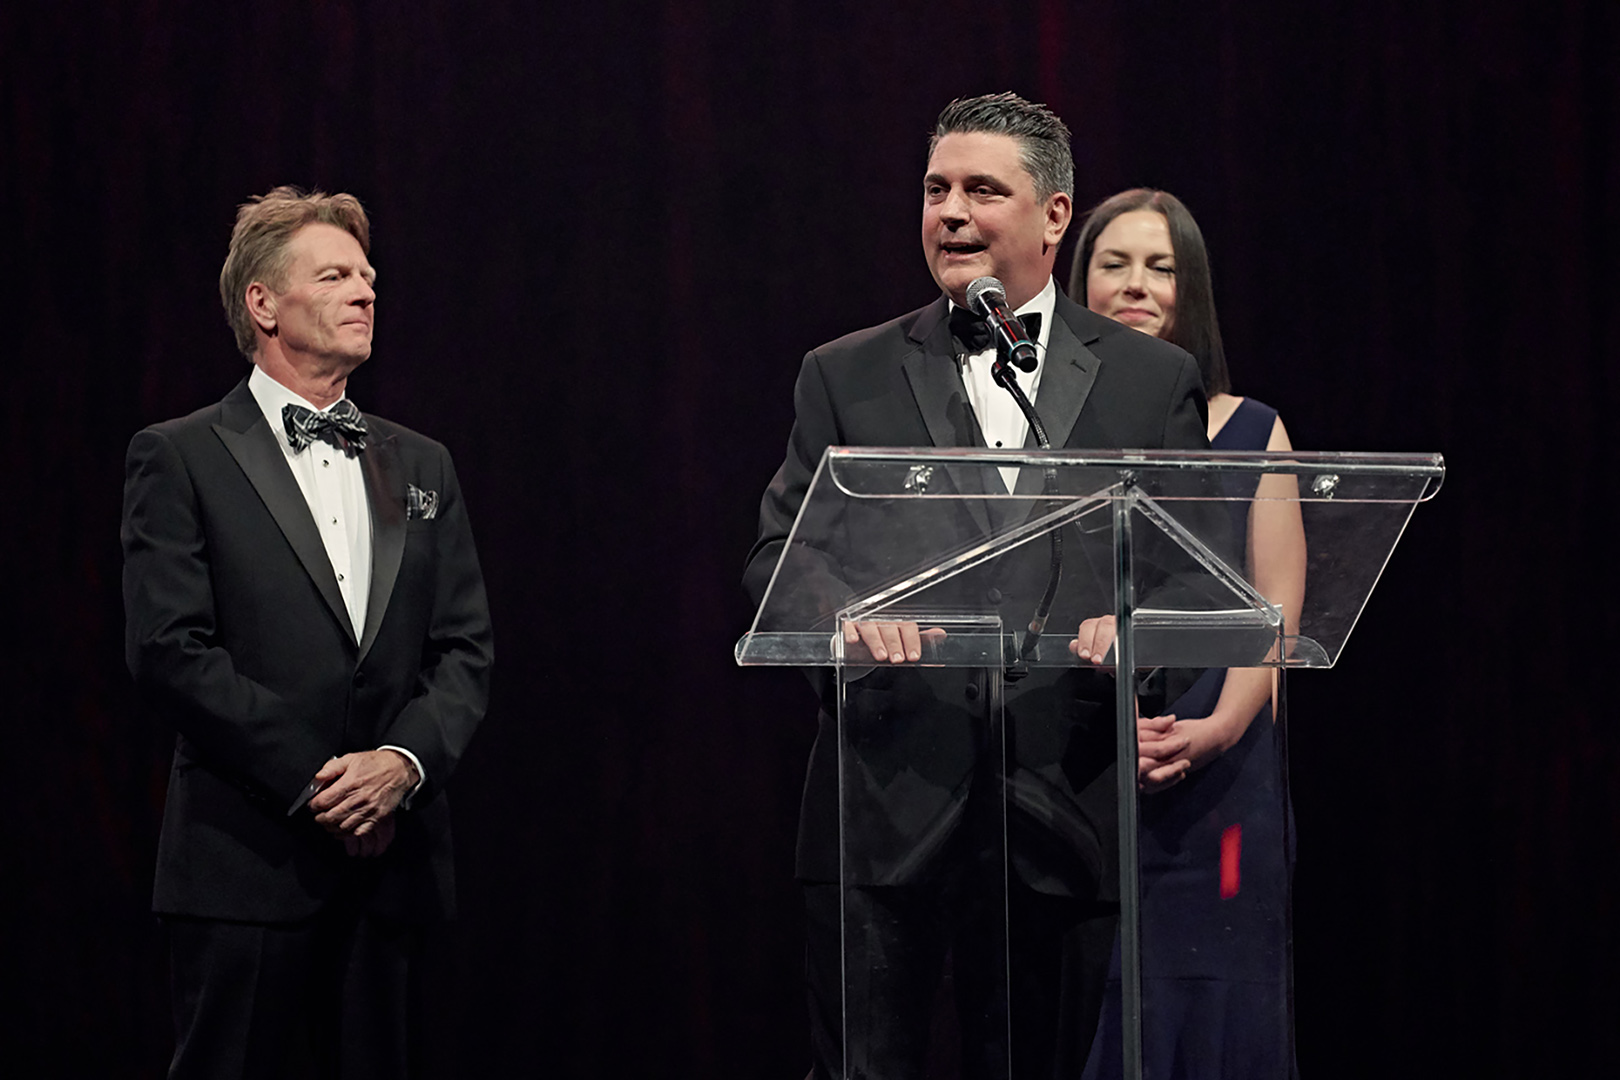 Claude Gagnon (BMO Financial Group), Sylvain Corbeil (TD Commercial Banking) & Nadine Renaud-Tinker (RBC Royal Bank) co-presidents of the 2019 Annual Gala